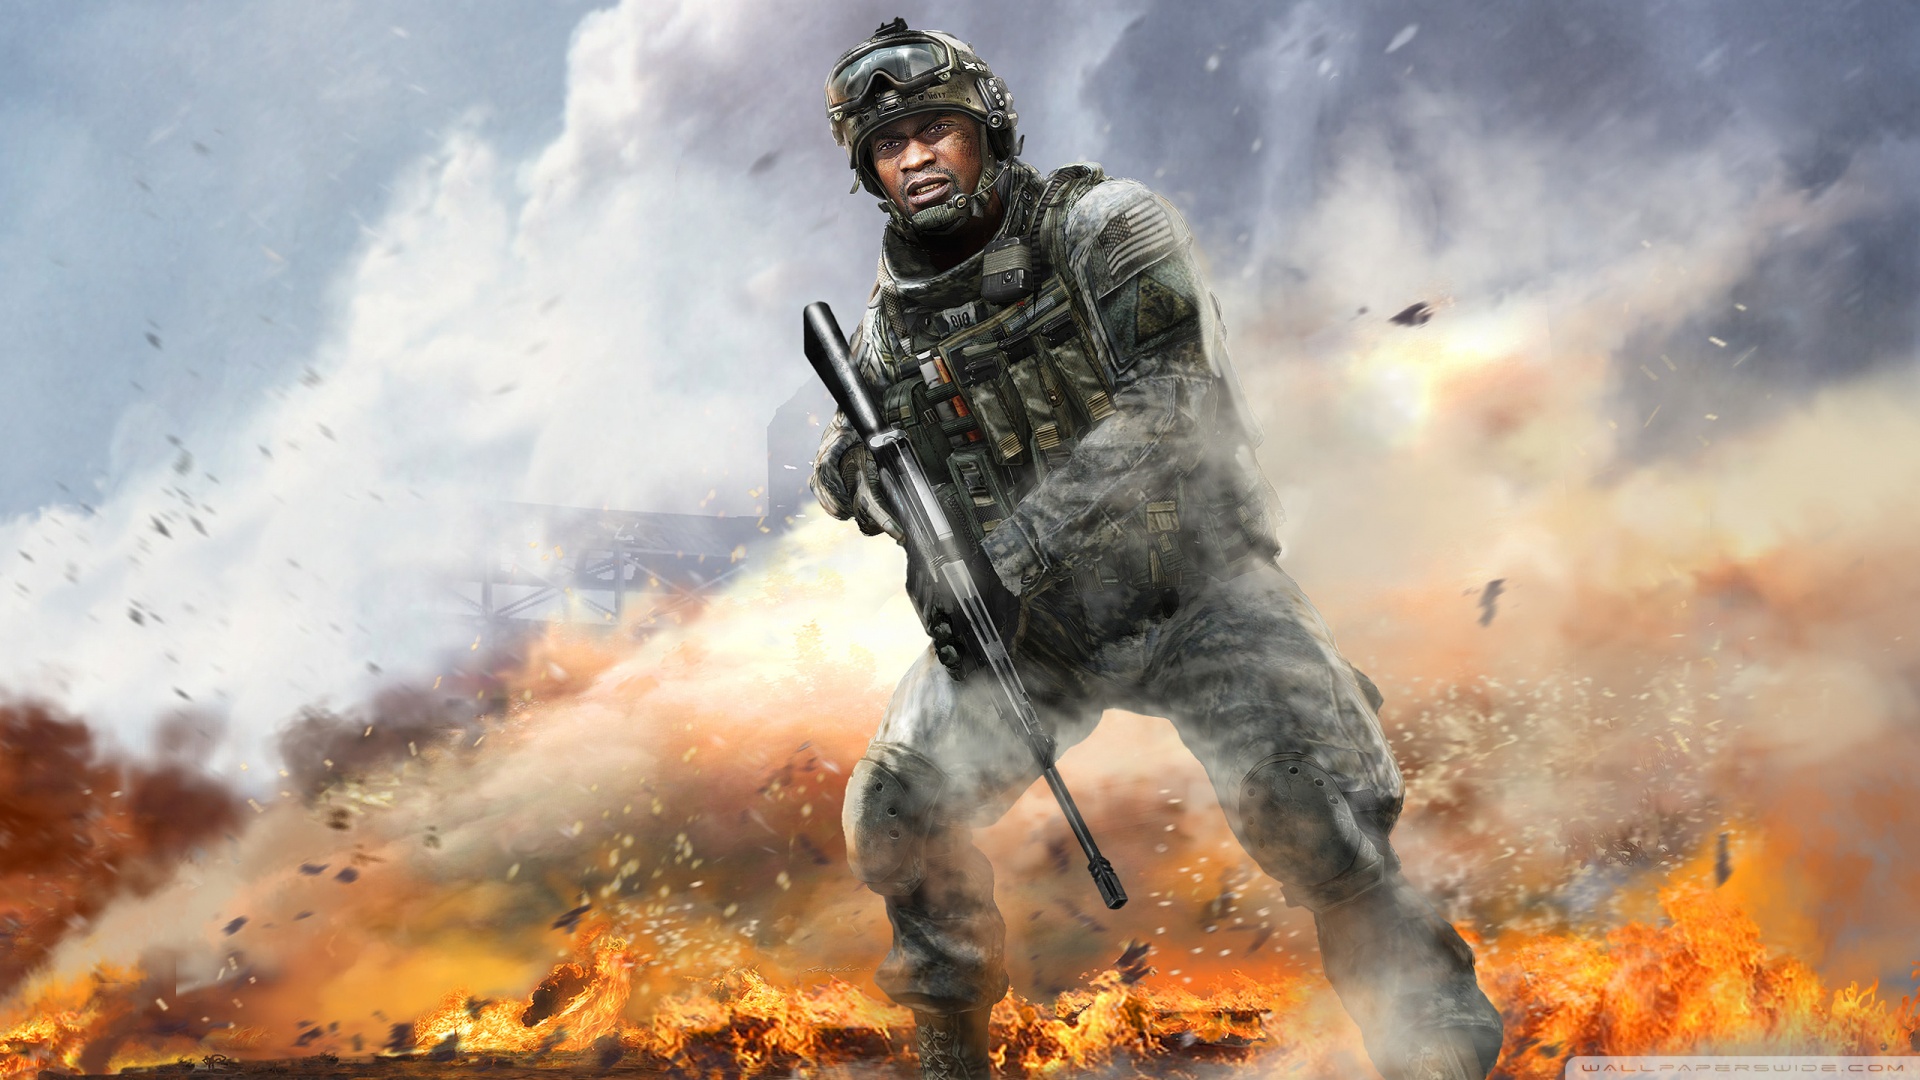 call of duty advanced warfare wallpaper,soldier,action adventure game,explosion,event,army